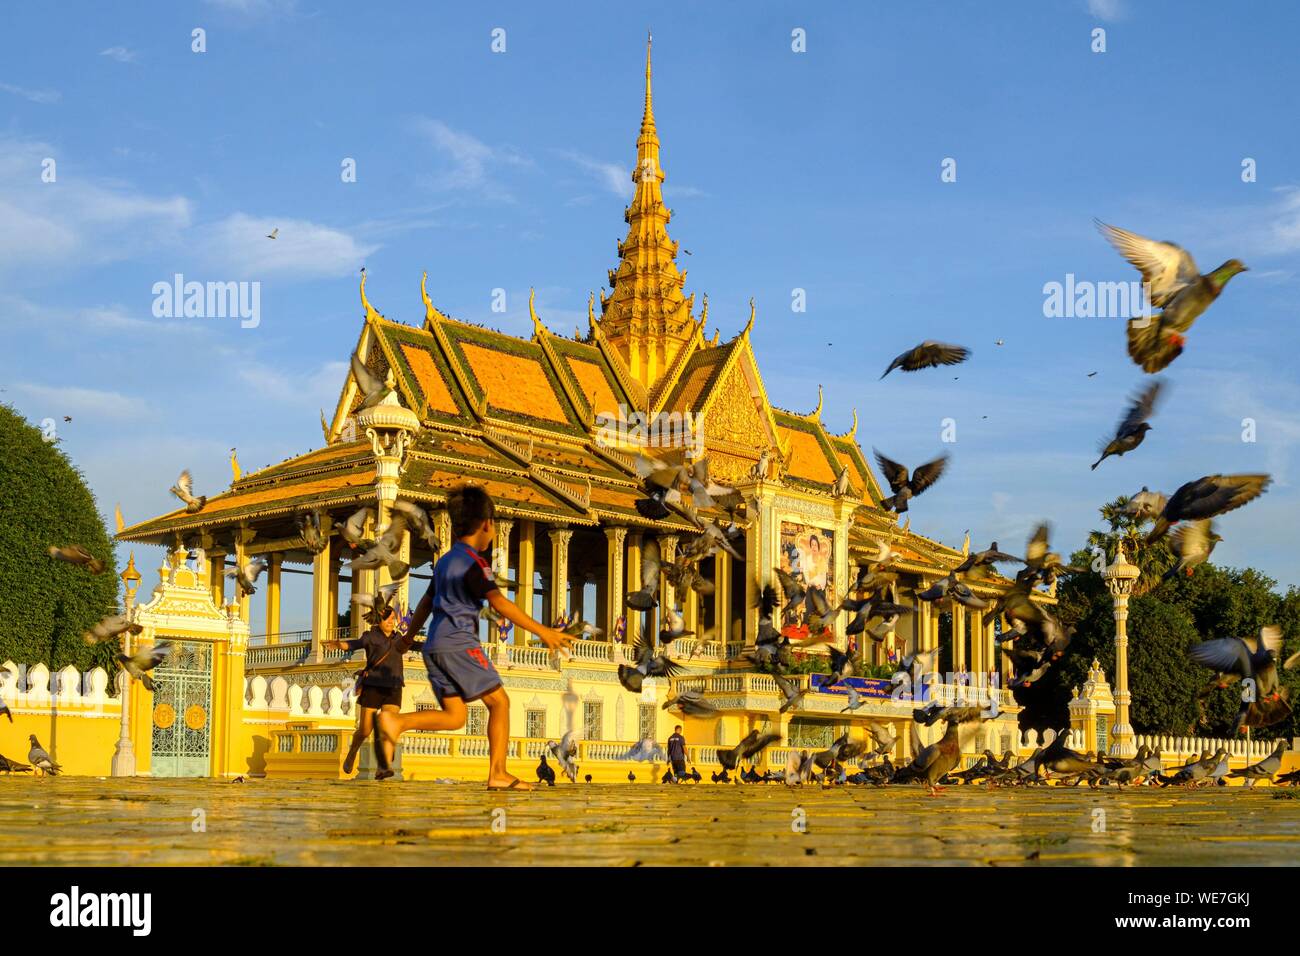 Cambodia, Phnom Penh, the Royal Palace, residence of the King of Cambodia, built in 1860, children playing with the pigeons Stock Photo